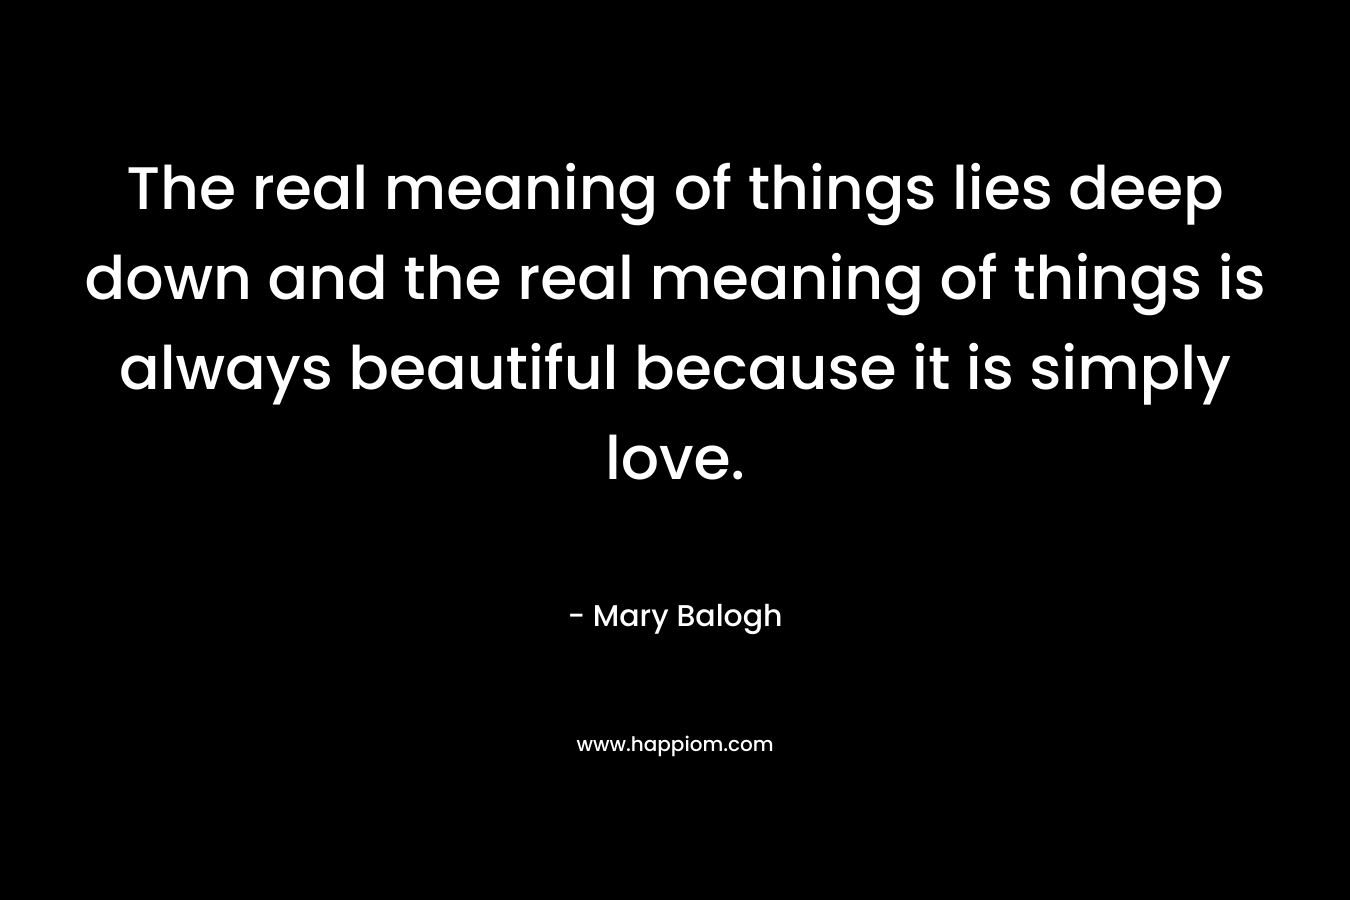 The real meaning of things lies deep down and the real meaning of things is always beautiful because it is simply love. – Mary Balogh